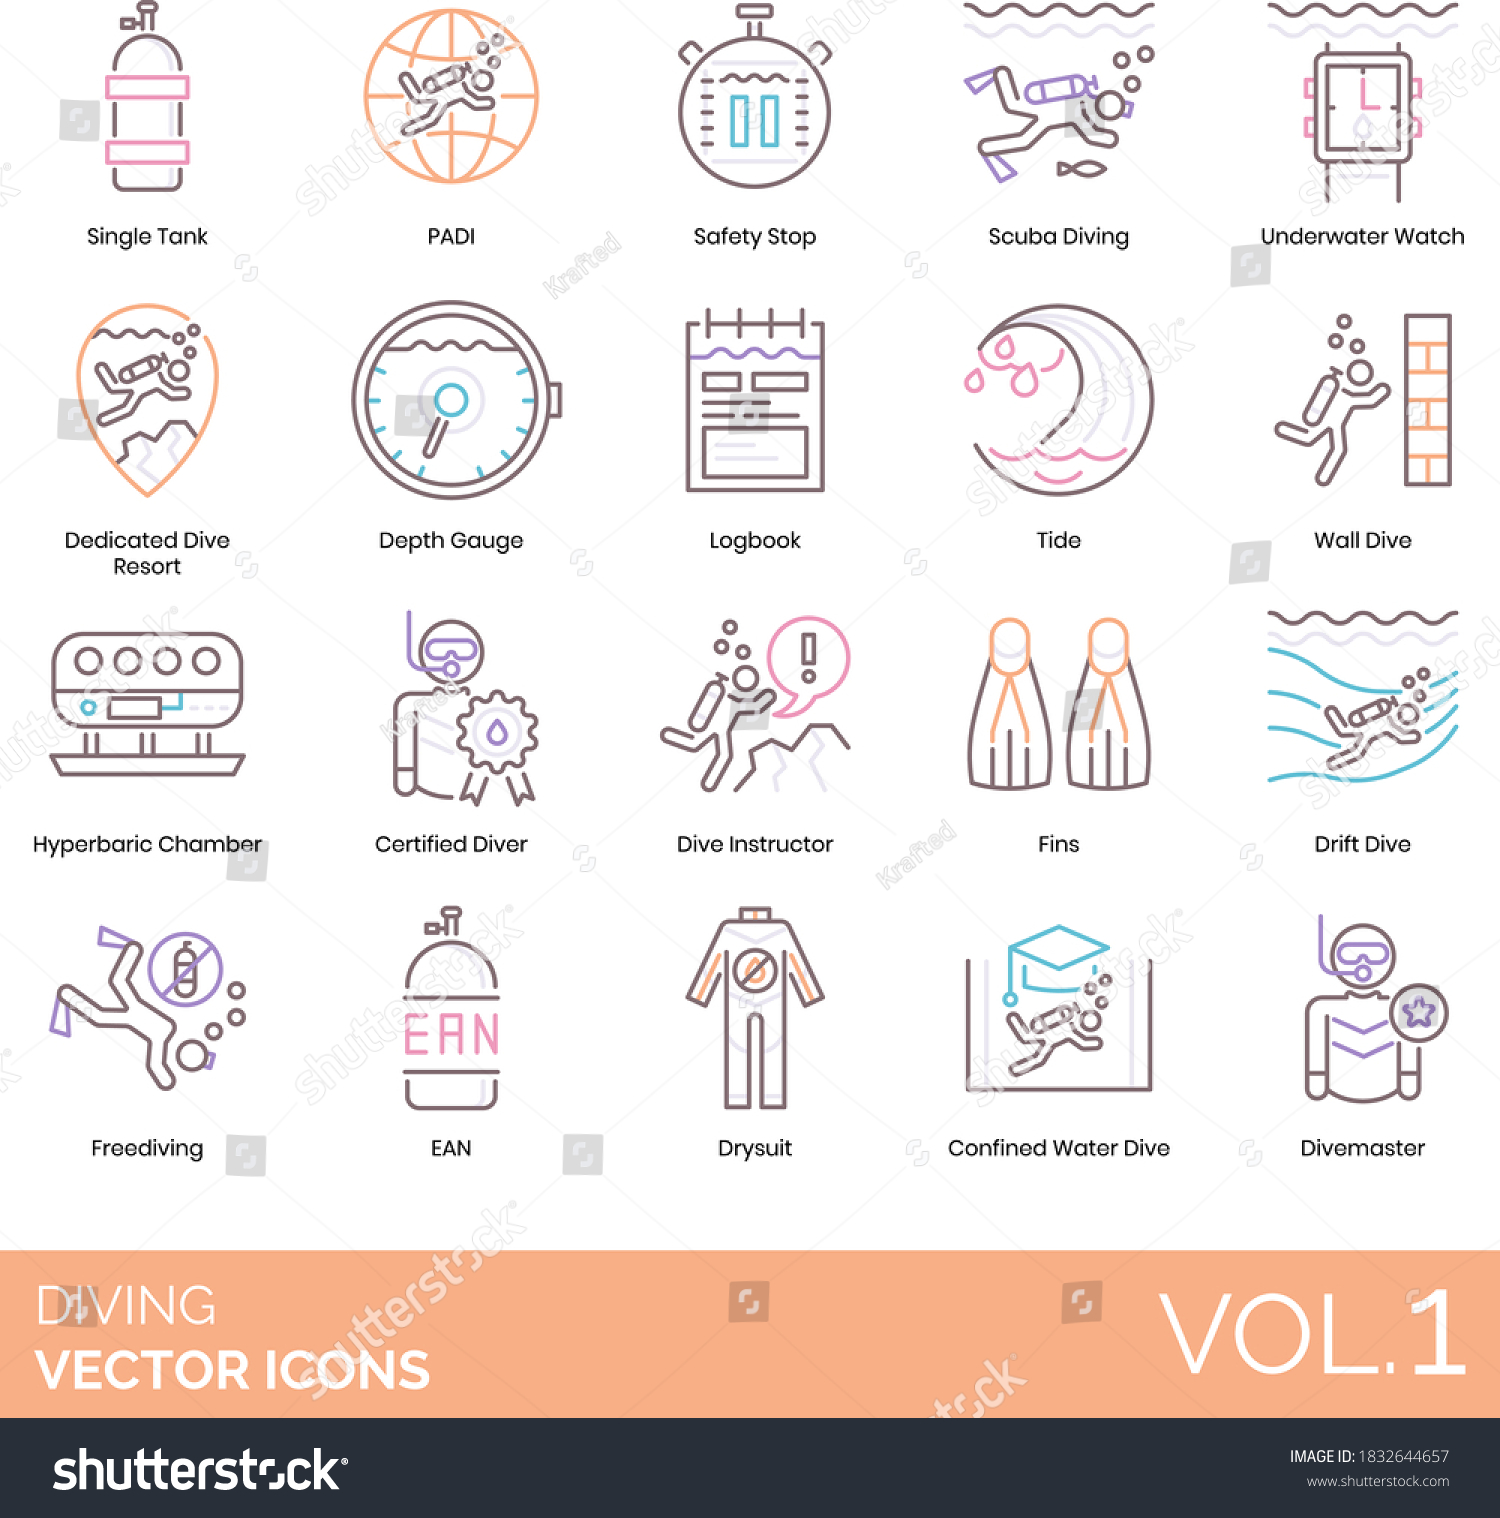 SVG of Diving icons including single tank, PADI, safety stop, dedicated resort, depth gauge, logbook, tide, wall, hyperbaric chamber, certified diver, instructor, fins, drift, freediving, EAN, divemaster. svg